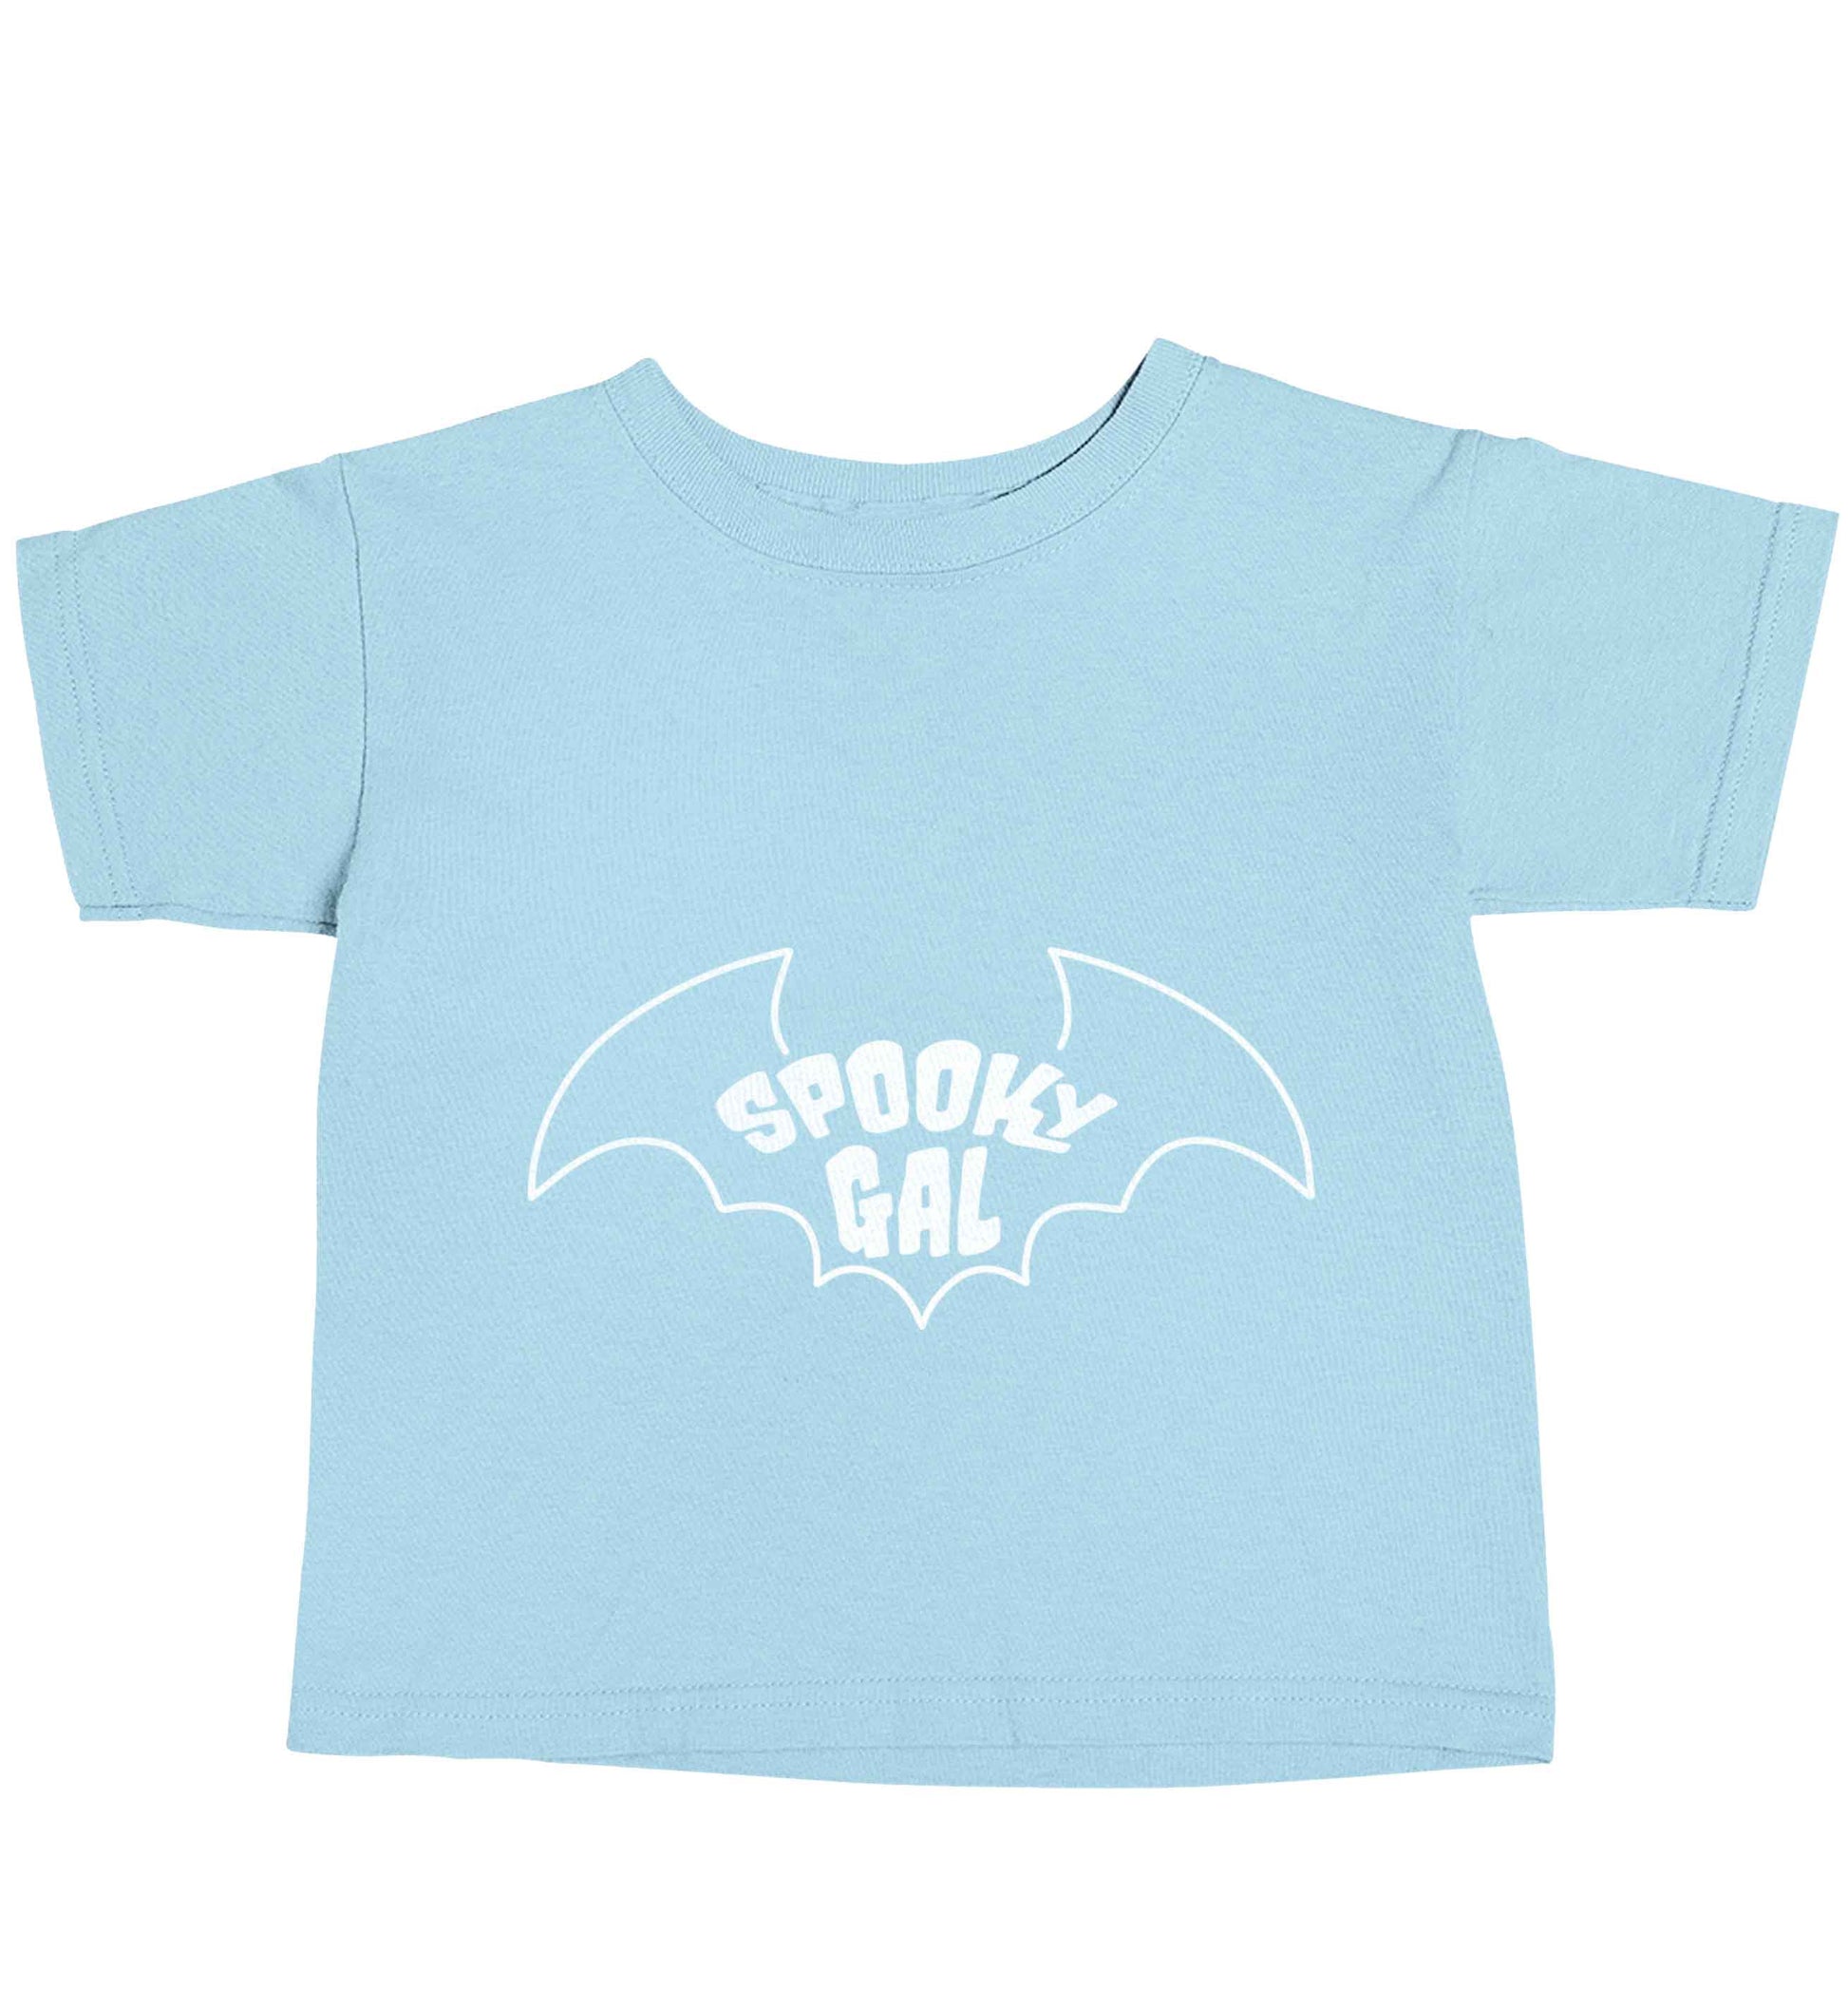 Spooky gal Kit light blue baby toddler Tshirt 2 Years